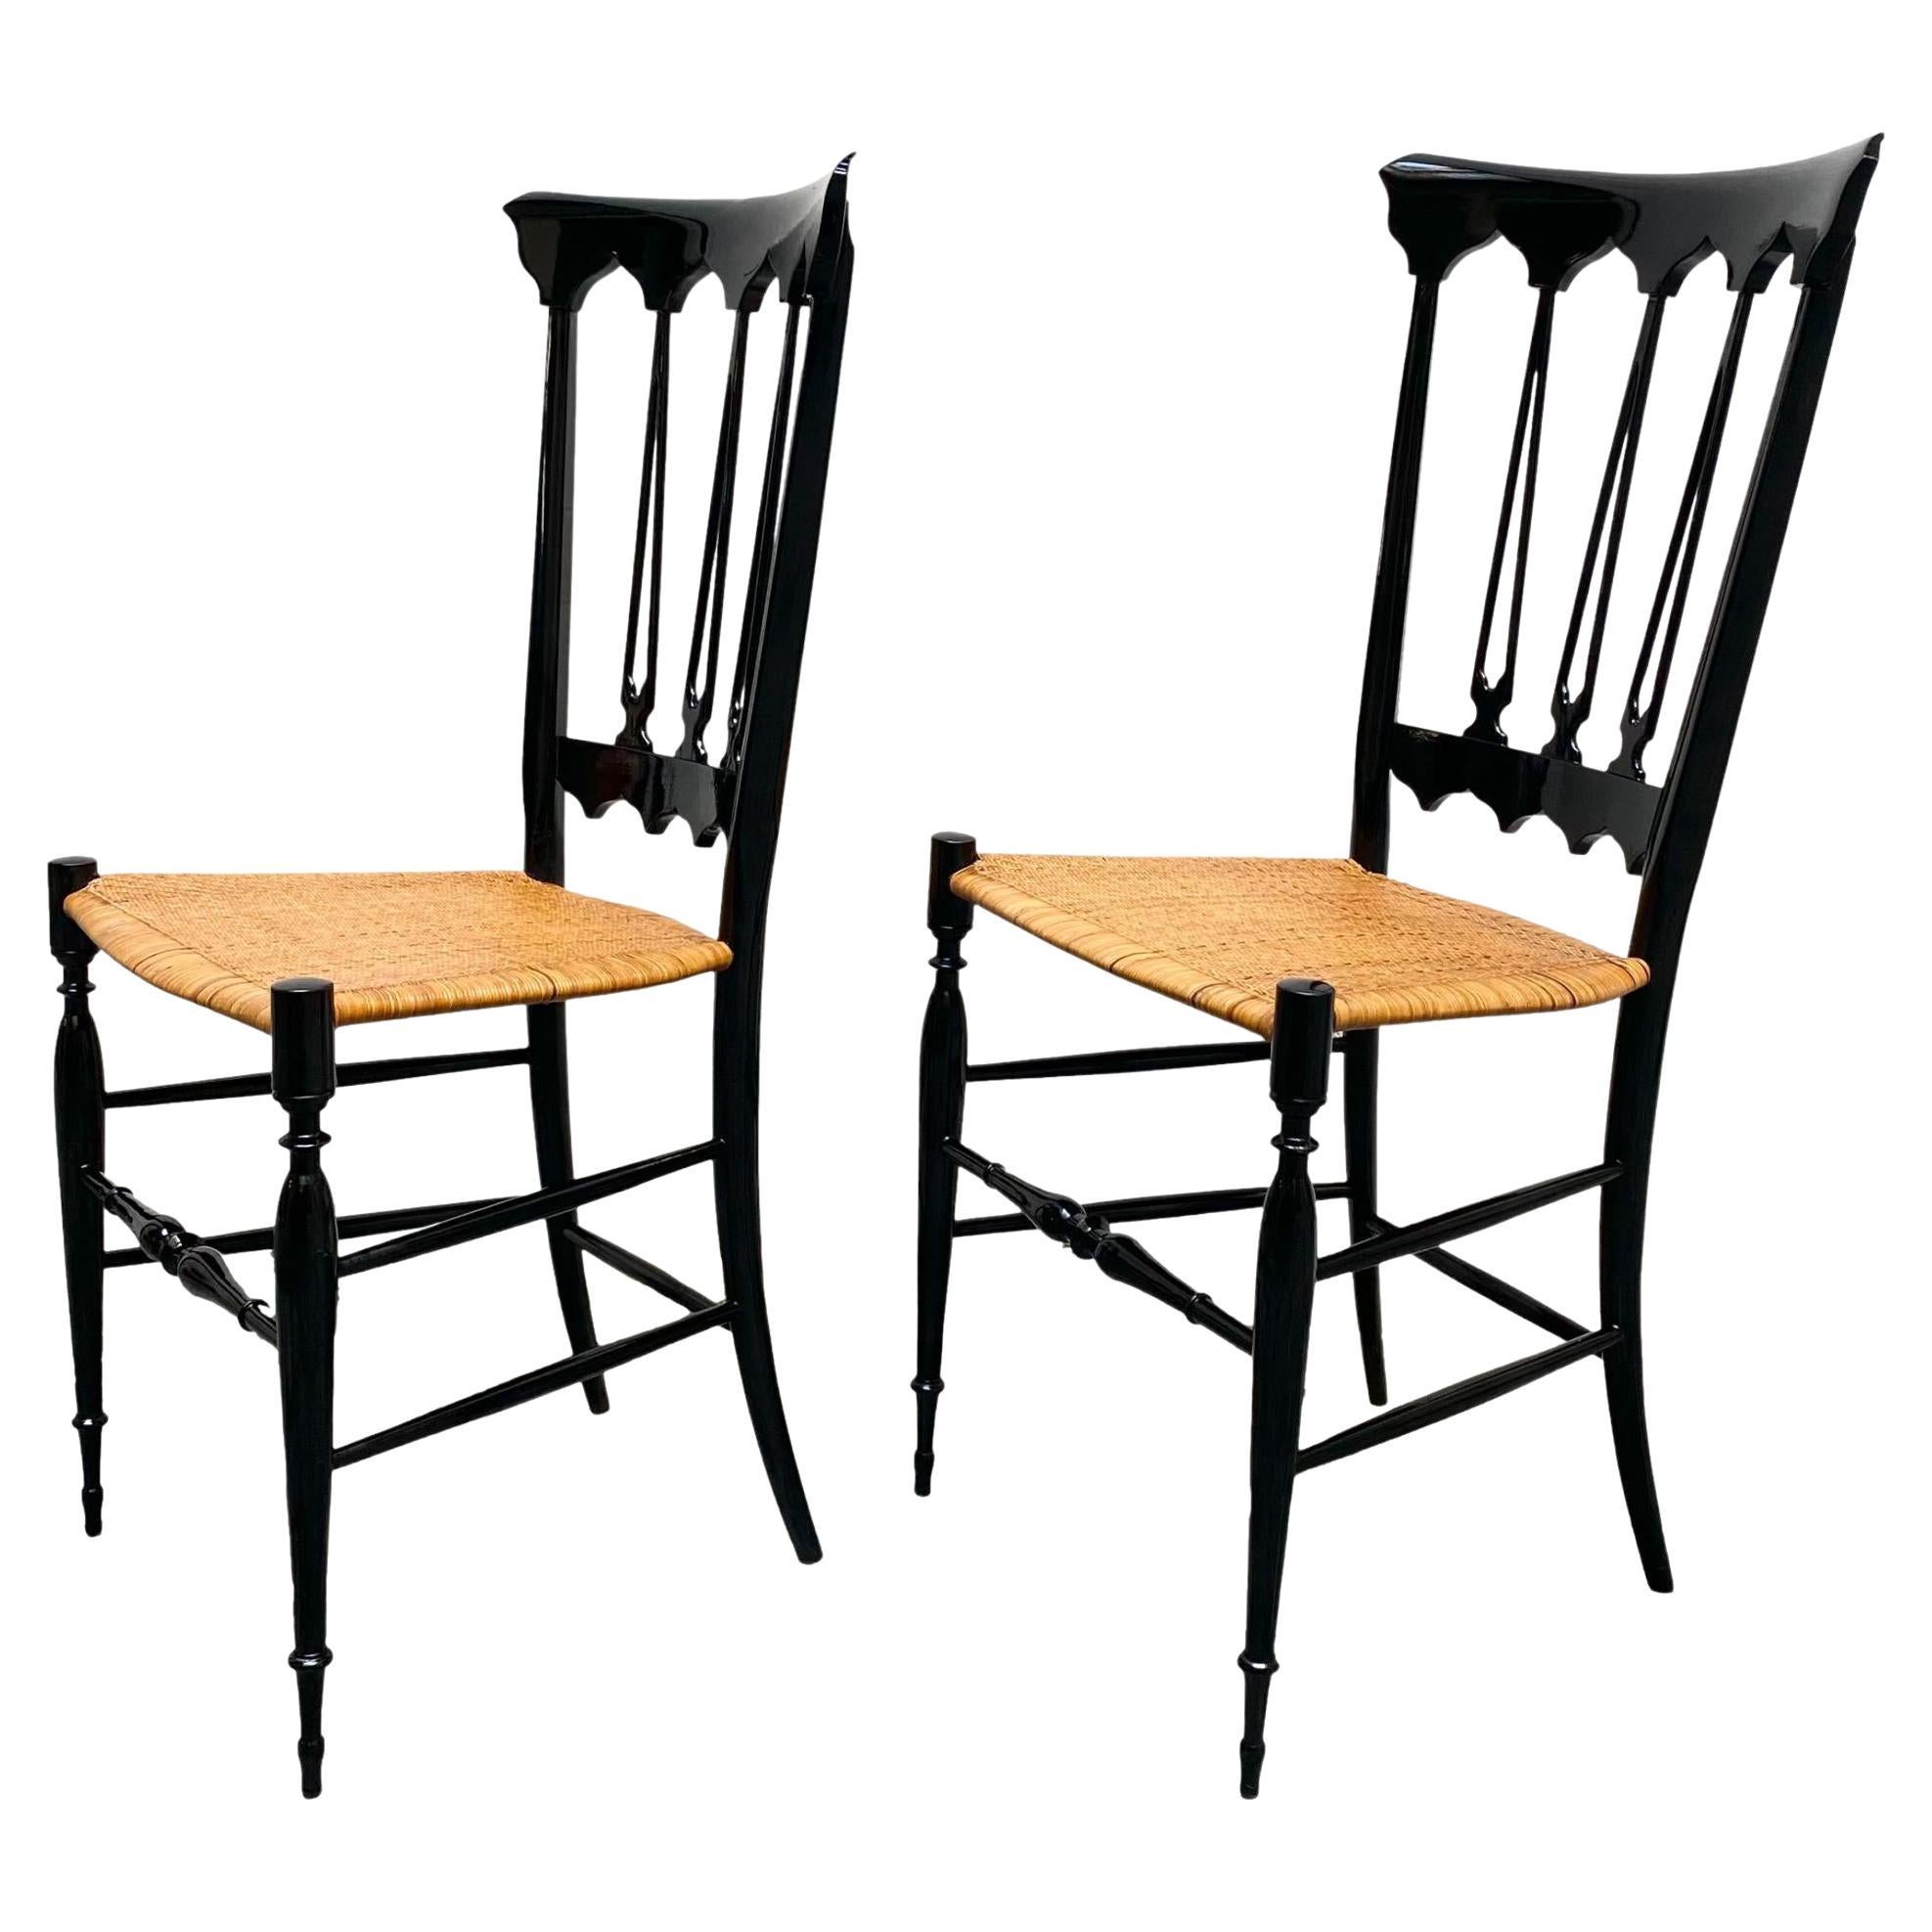 Fratelli Sanguineti Pair of Black Wood and Wicker Chairs, Italy 1950s